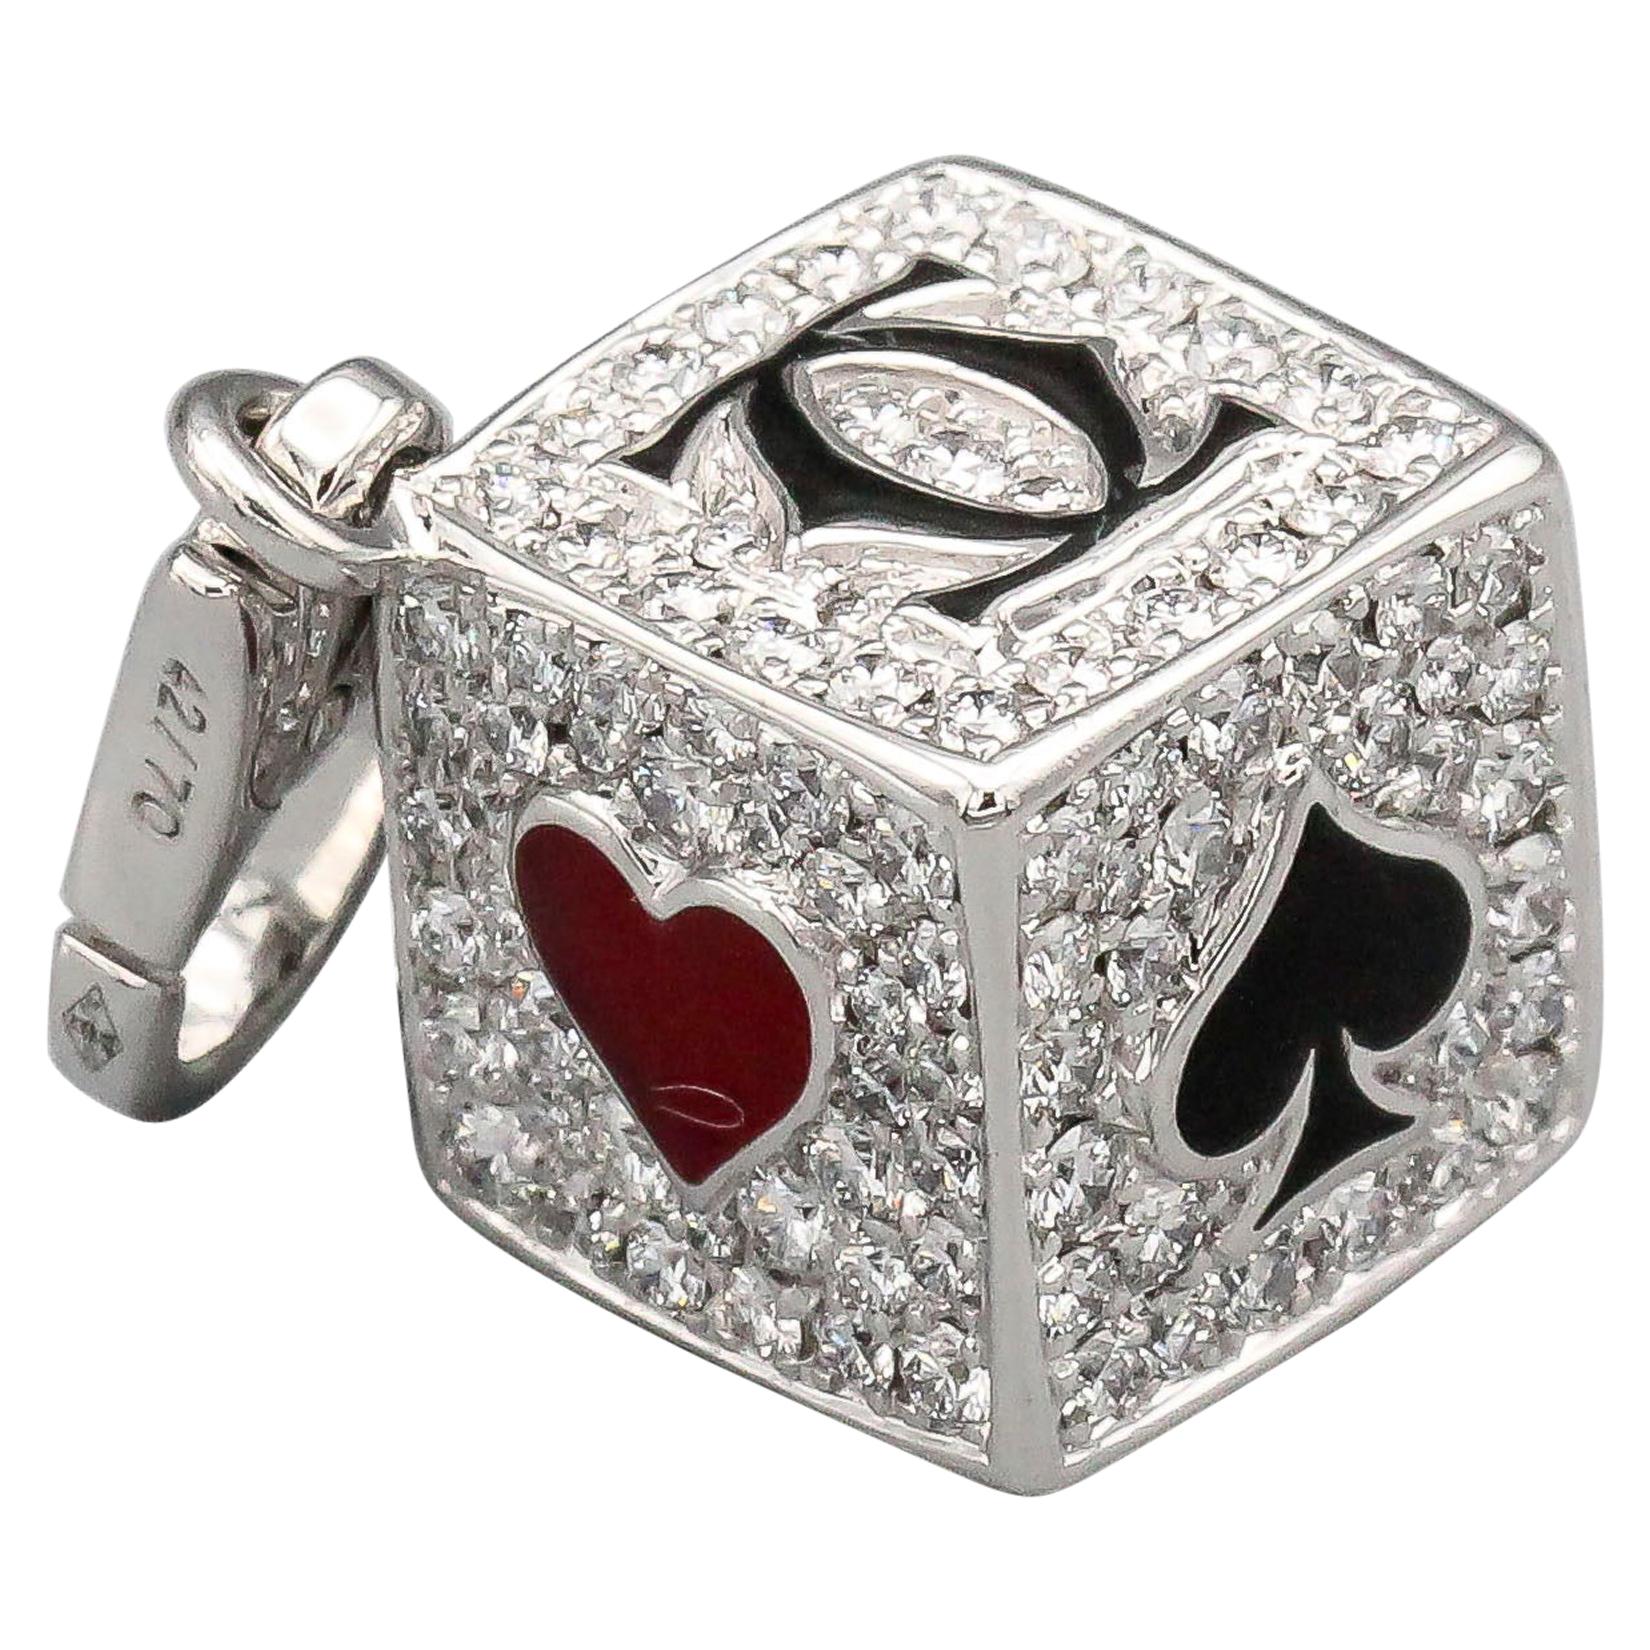 Cartier Limited Edition Diamond and Enamel Playing Card Suite Charm